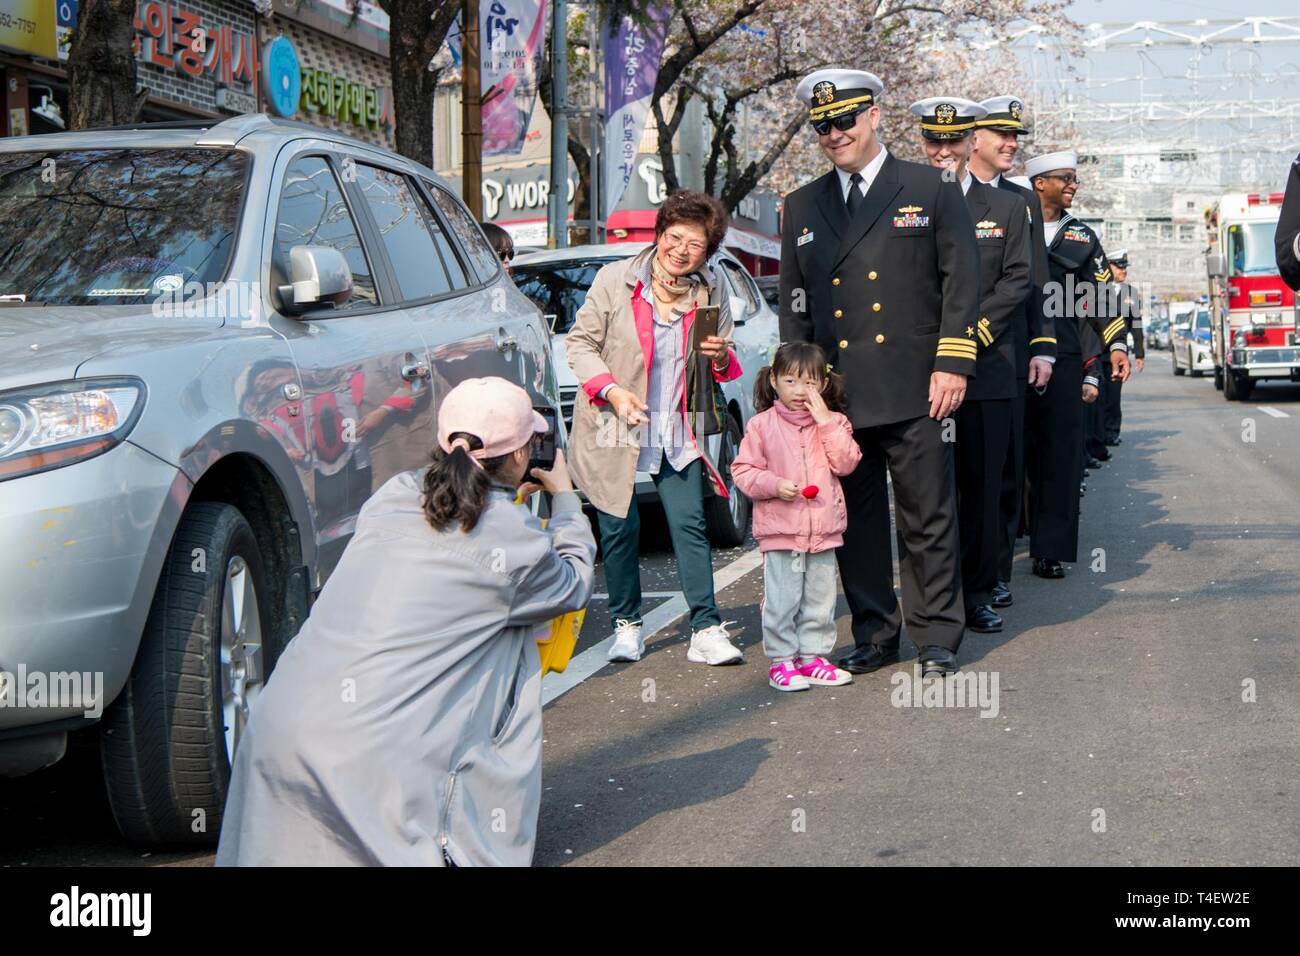 CHINHAE, Republic of Korea (April 05, 2019) Cmdr. Jeremy Ewing, commander, Fleet Activities Chinhae (CFAC) poses for a photo with a family during the 57th annual Jinhae Gunhangje military port festival parade. The festival honors Admiral Yi Sun-sin, a great naval hero of Korea, whose victories still inform the fighting spirit of the ROK Navy. Stock Photo